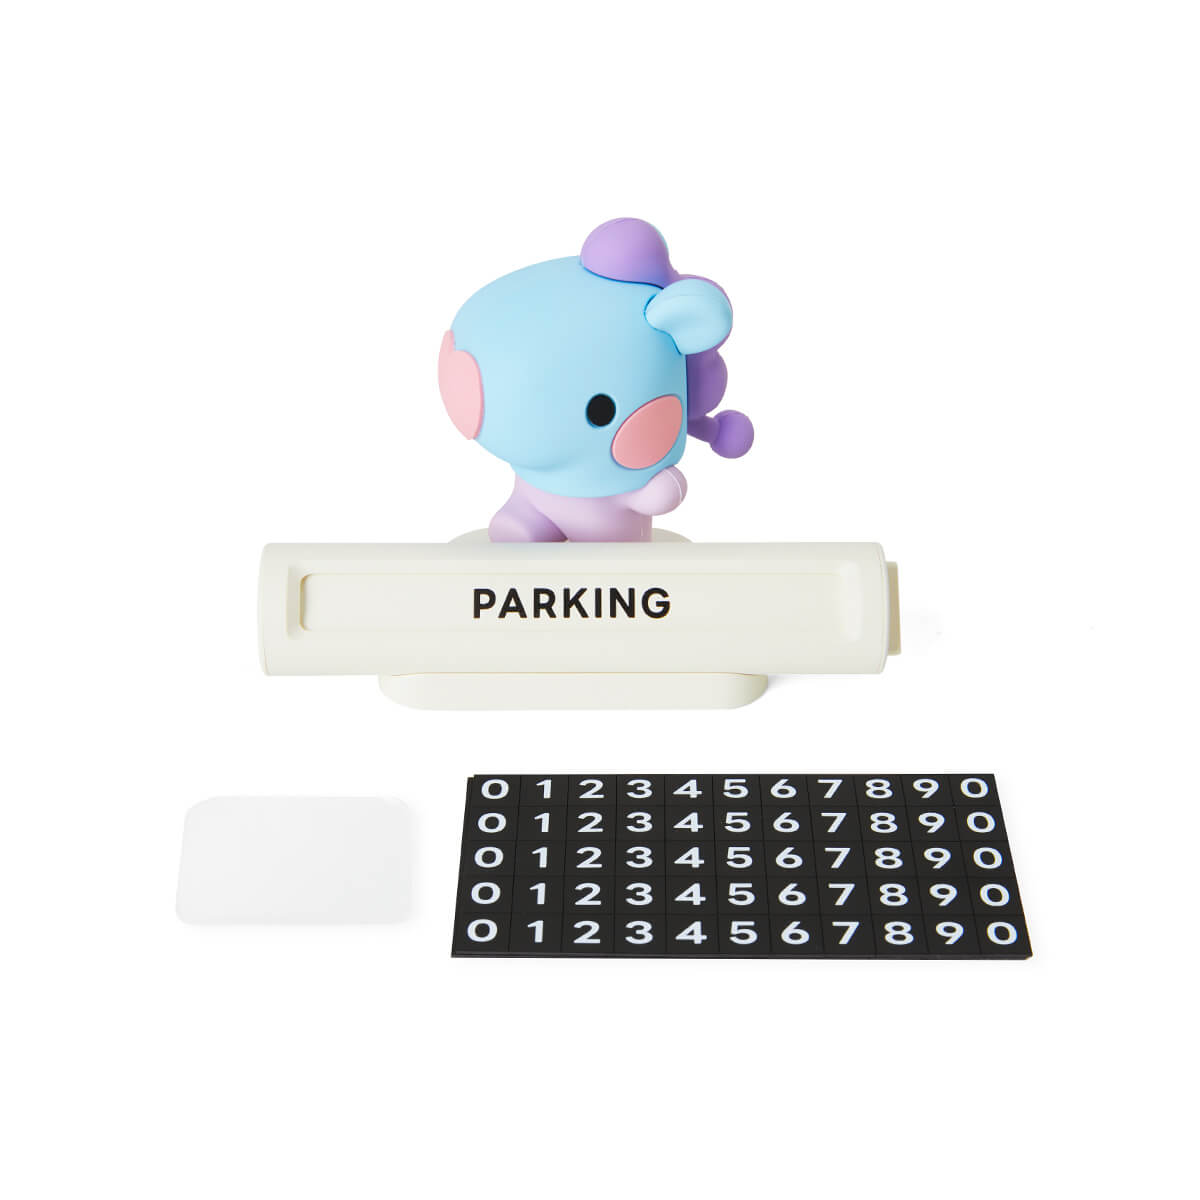 BT21 MANG minini Parking Phone Number Plate Accessories - Kpop Wholesale | Seoufly